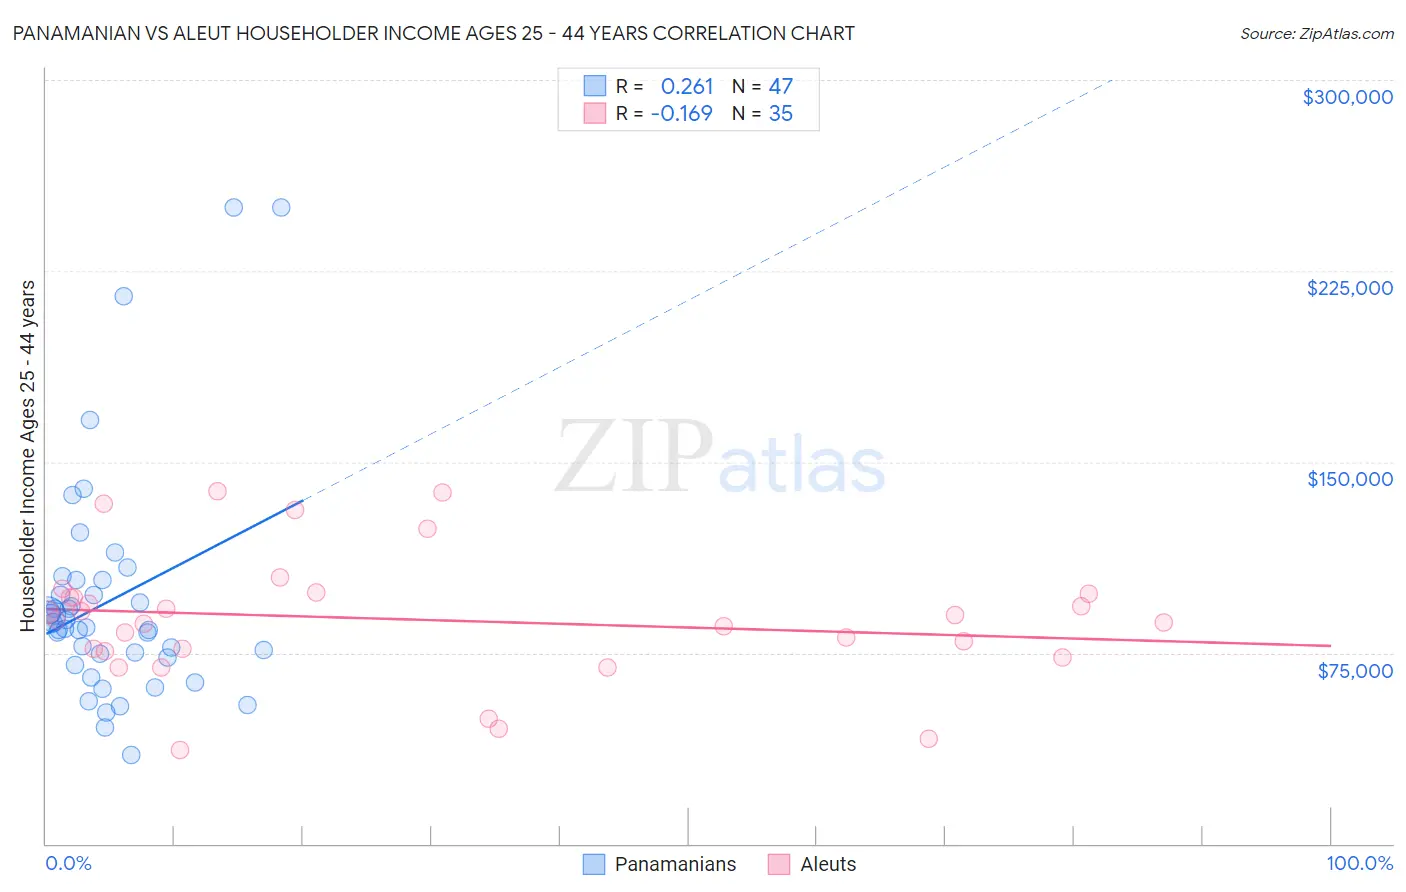 Panamanian vs Aleut Householder Income Ages 25 - 44 years